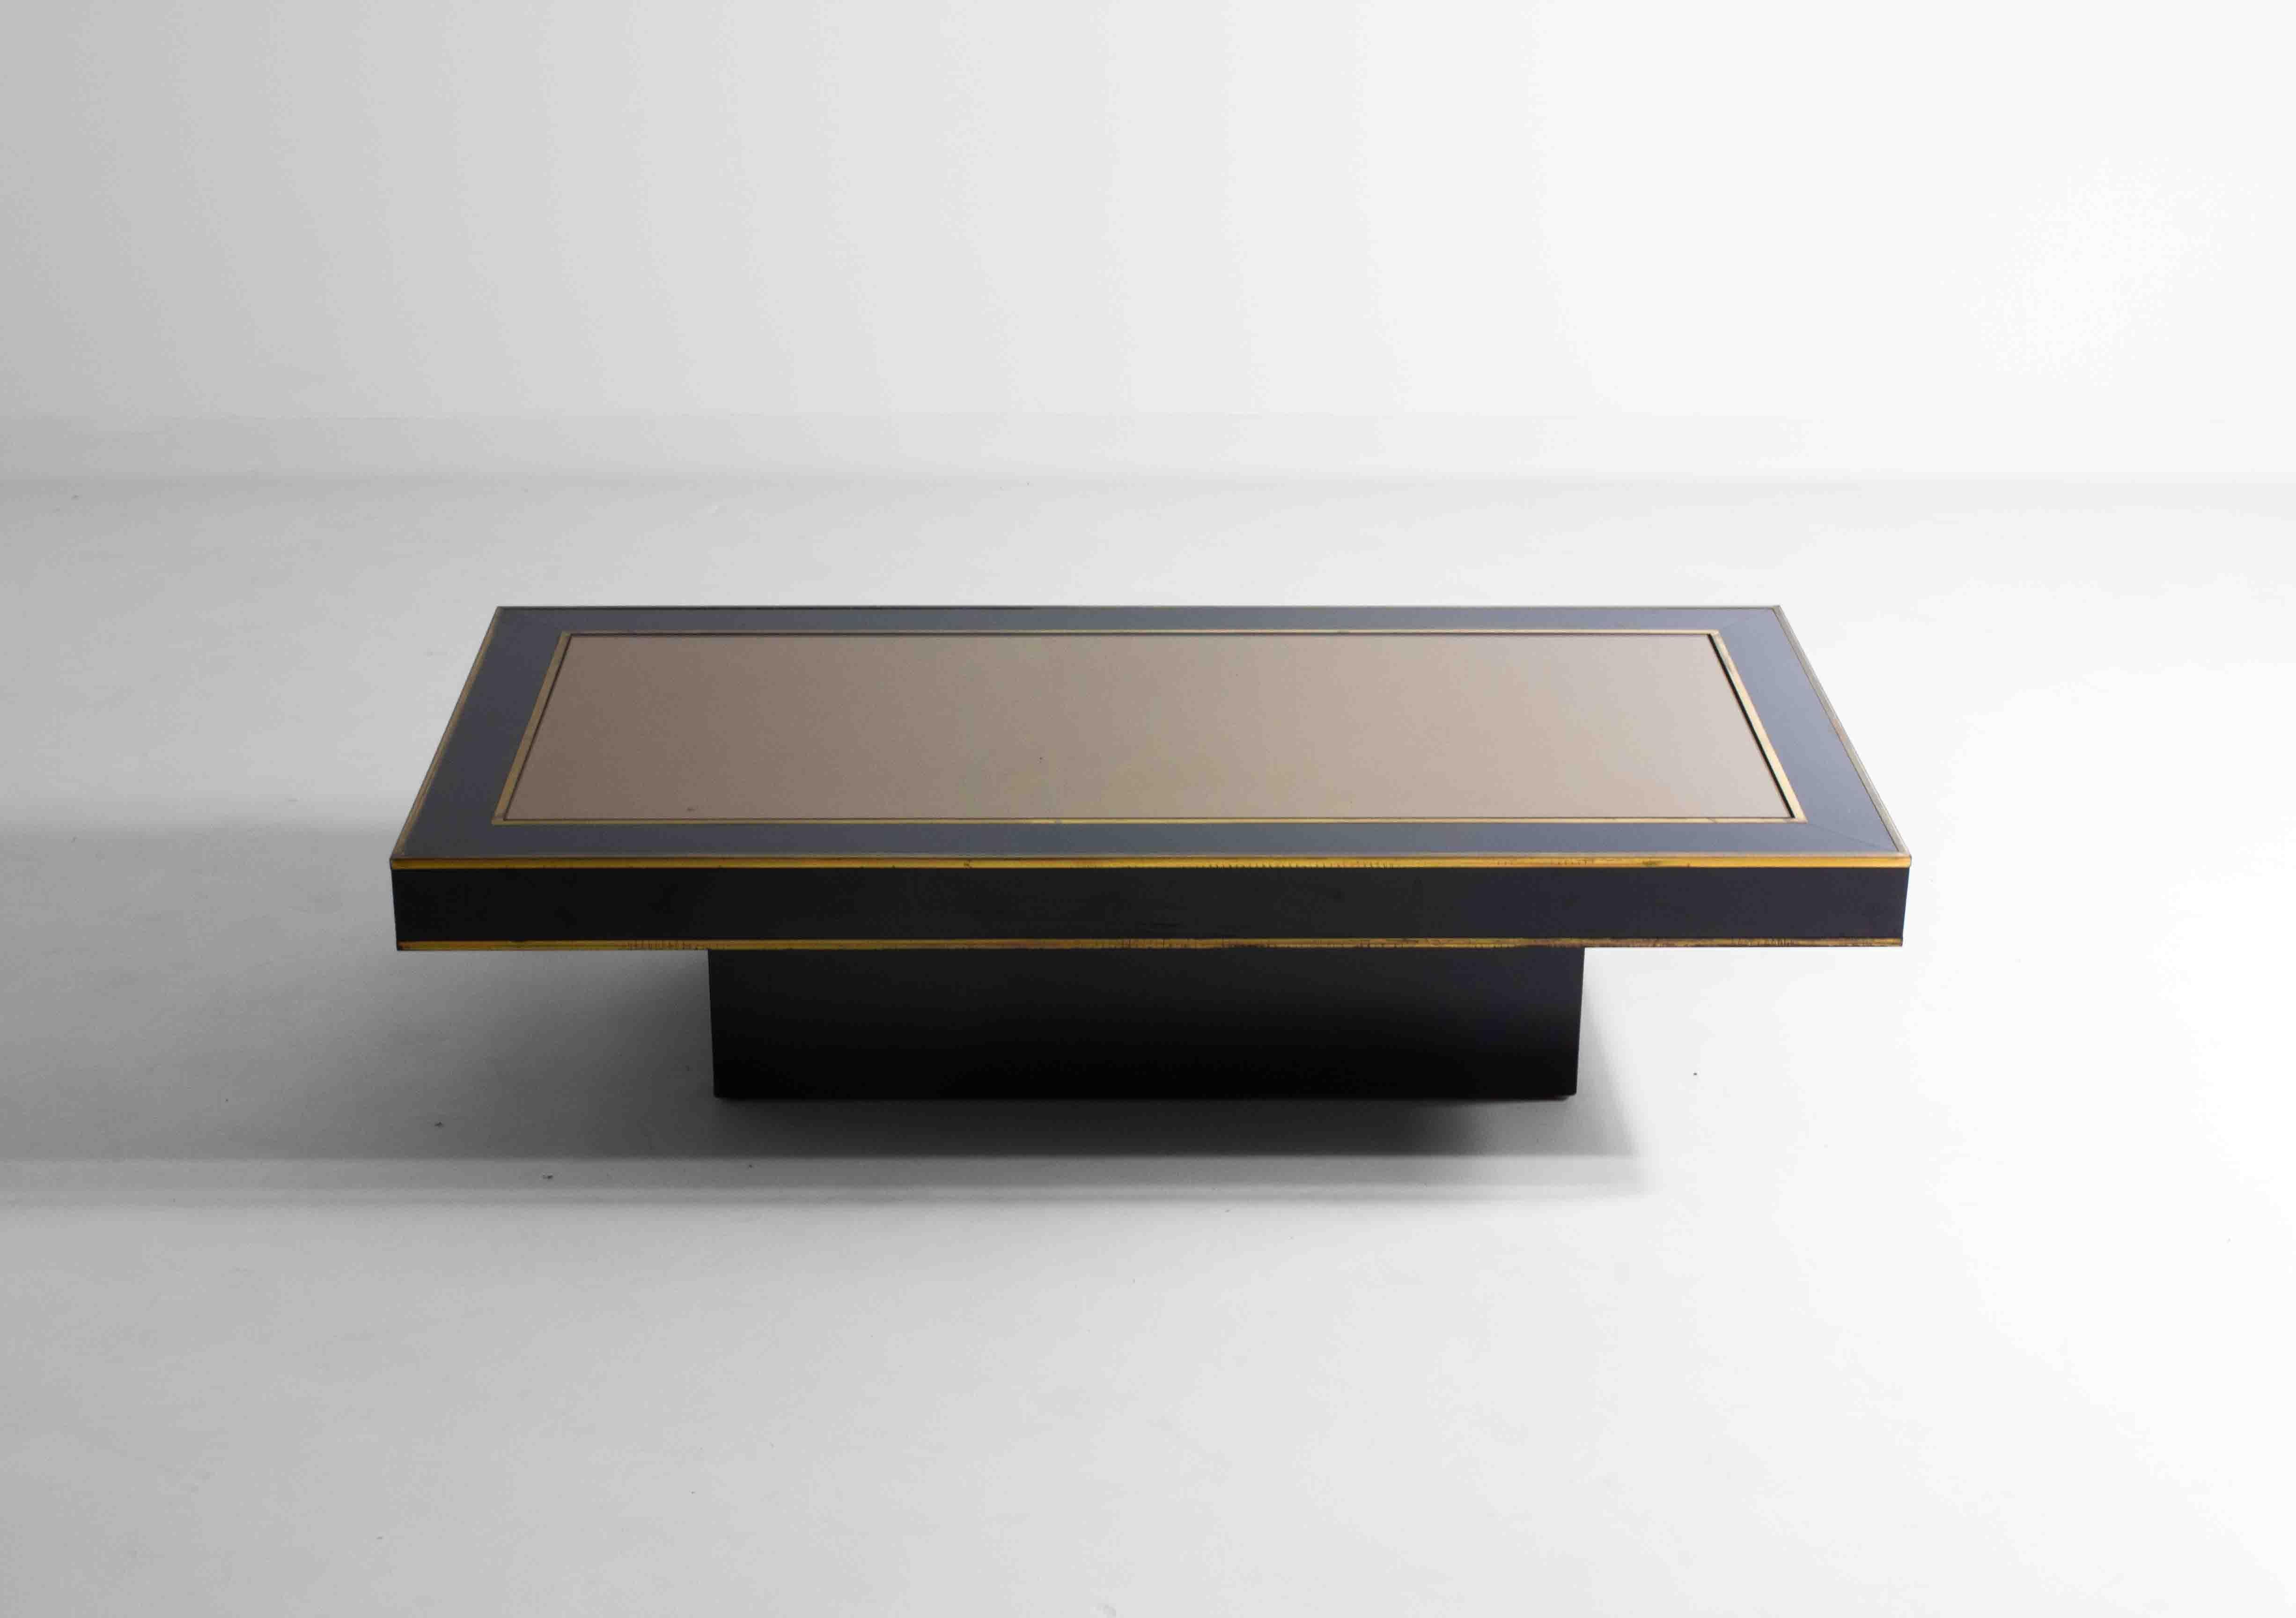 This sleek, Italian coffee table made from black laminated wood, supporting a mirrored top would fit perfectly in in a 1980s Miami Vice style interior. The brass details make this coffee table stand out among similar ones. This stable is in good